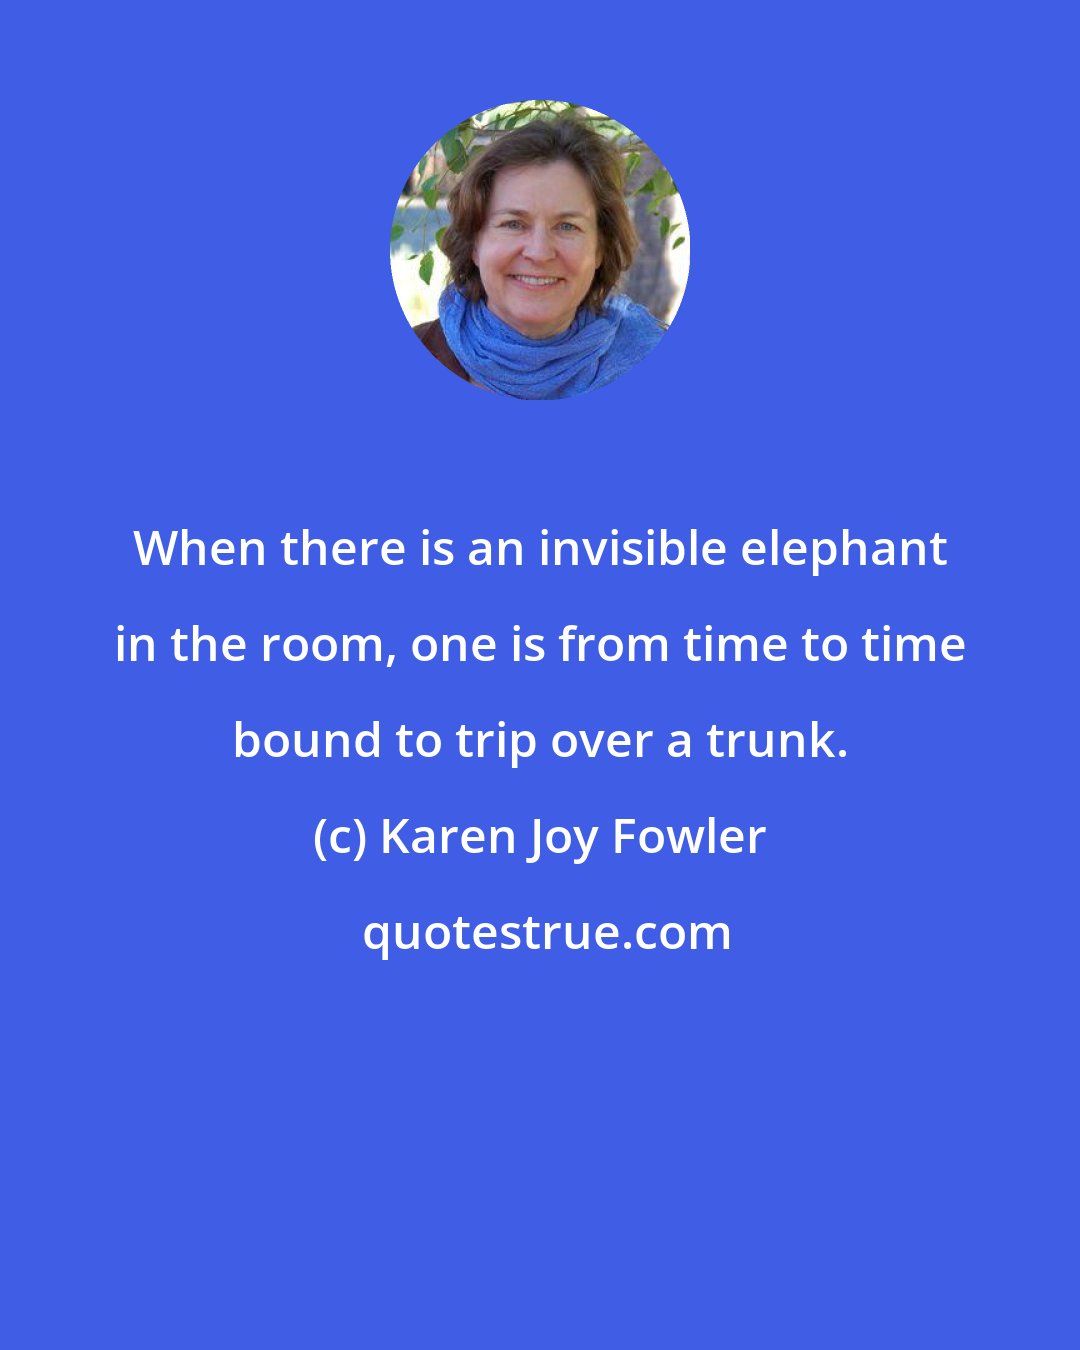 Karen Joy Fowler: When there is an invisible elephant in the room, one is from time to time bound to trip over a trunk.